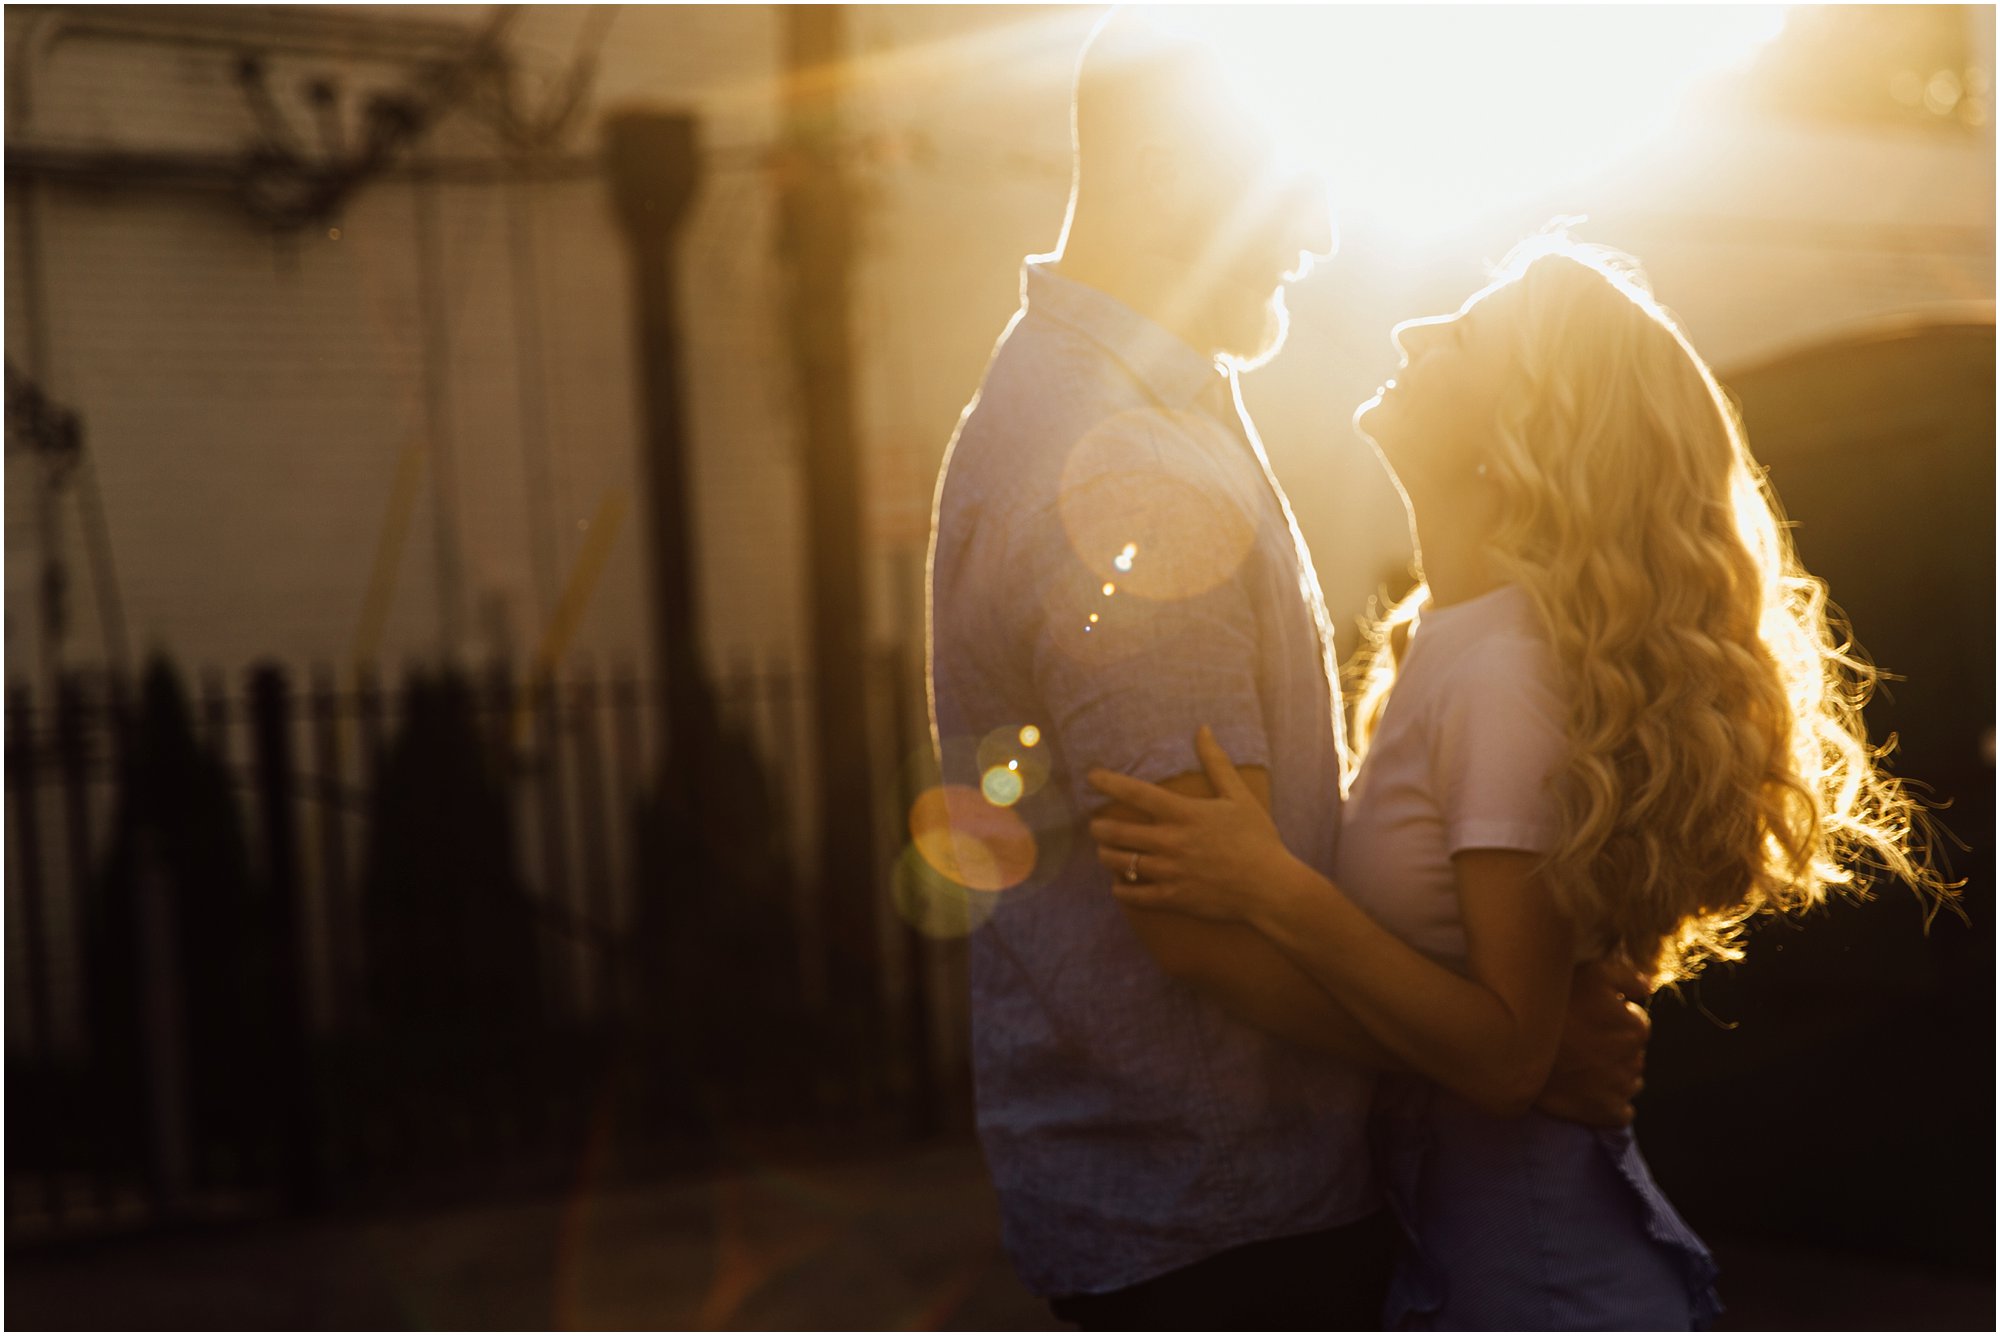 Lens flared image with couple romantically embracing at sunset